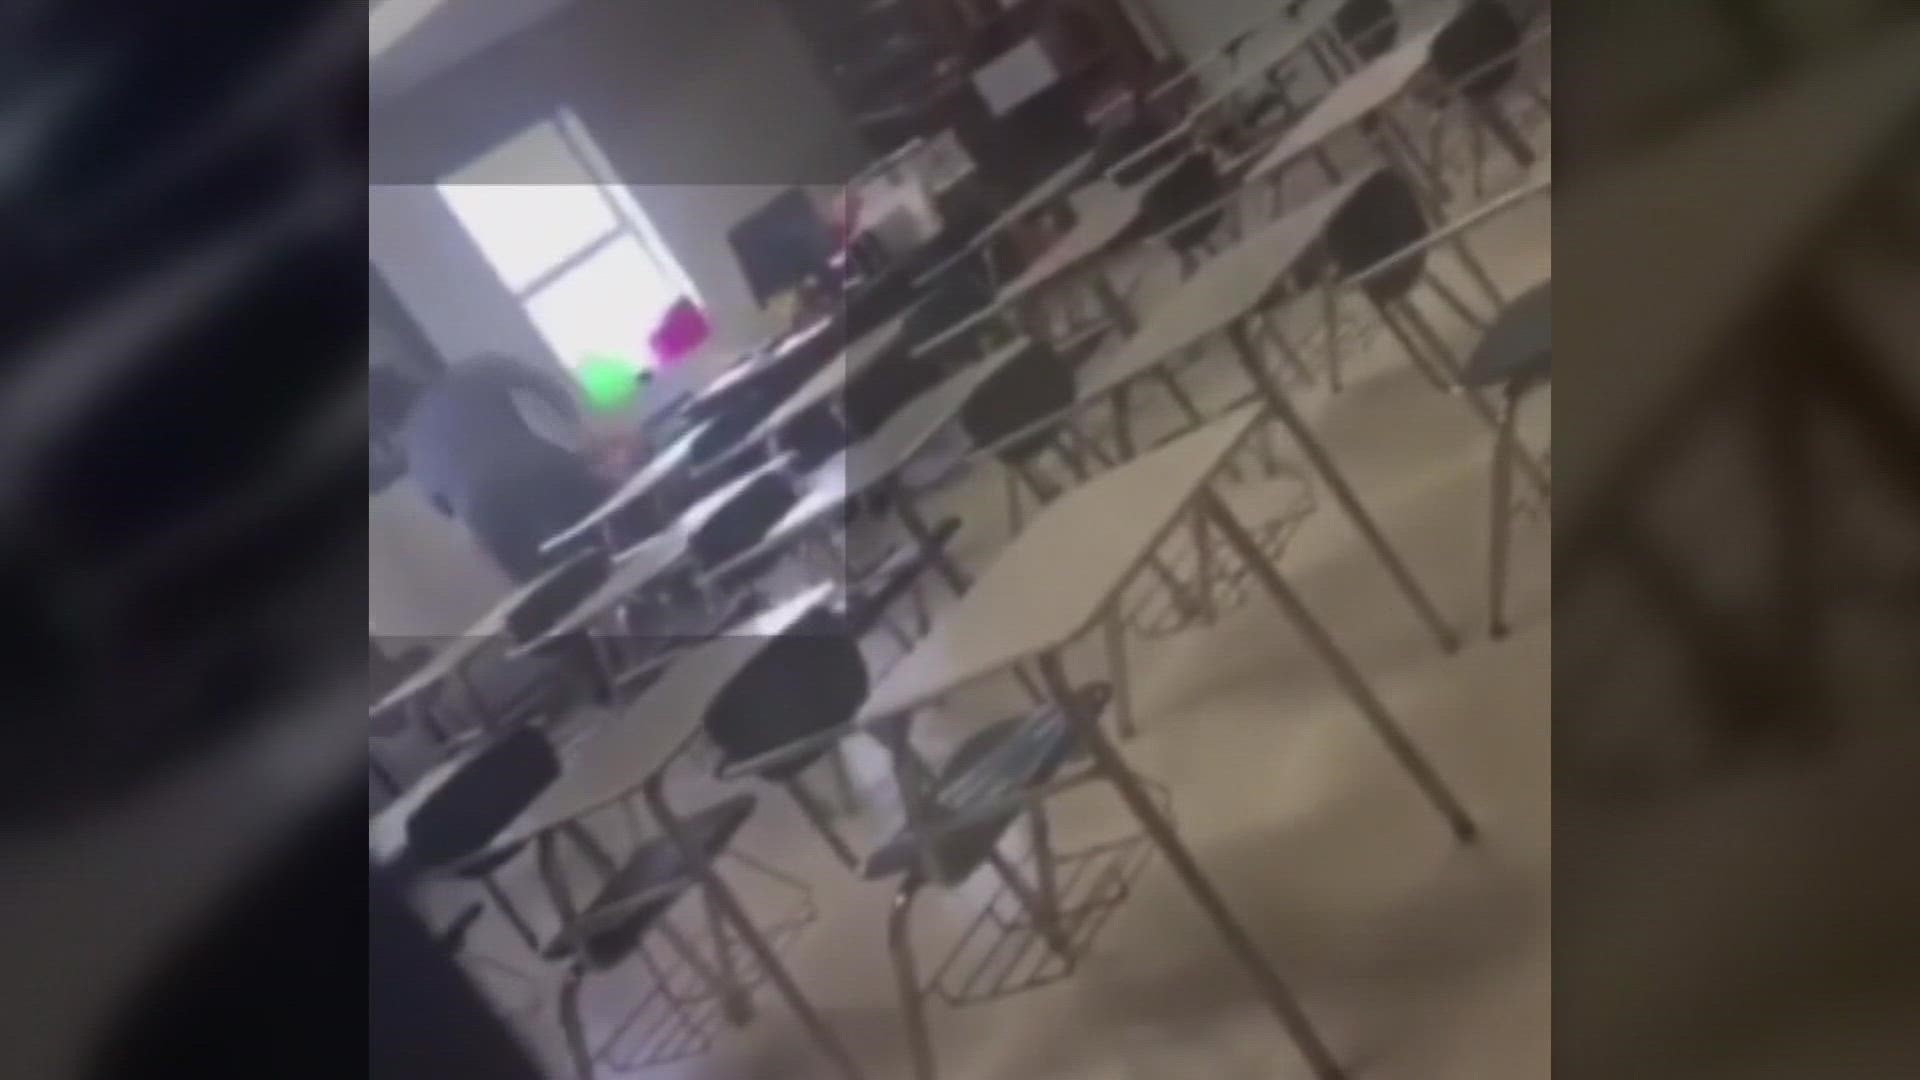 A Covington High student was arrested after an attack on a teacher between classes.